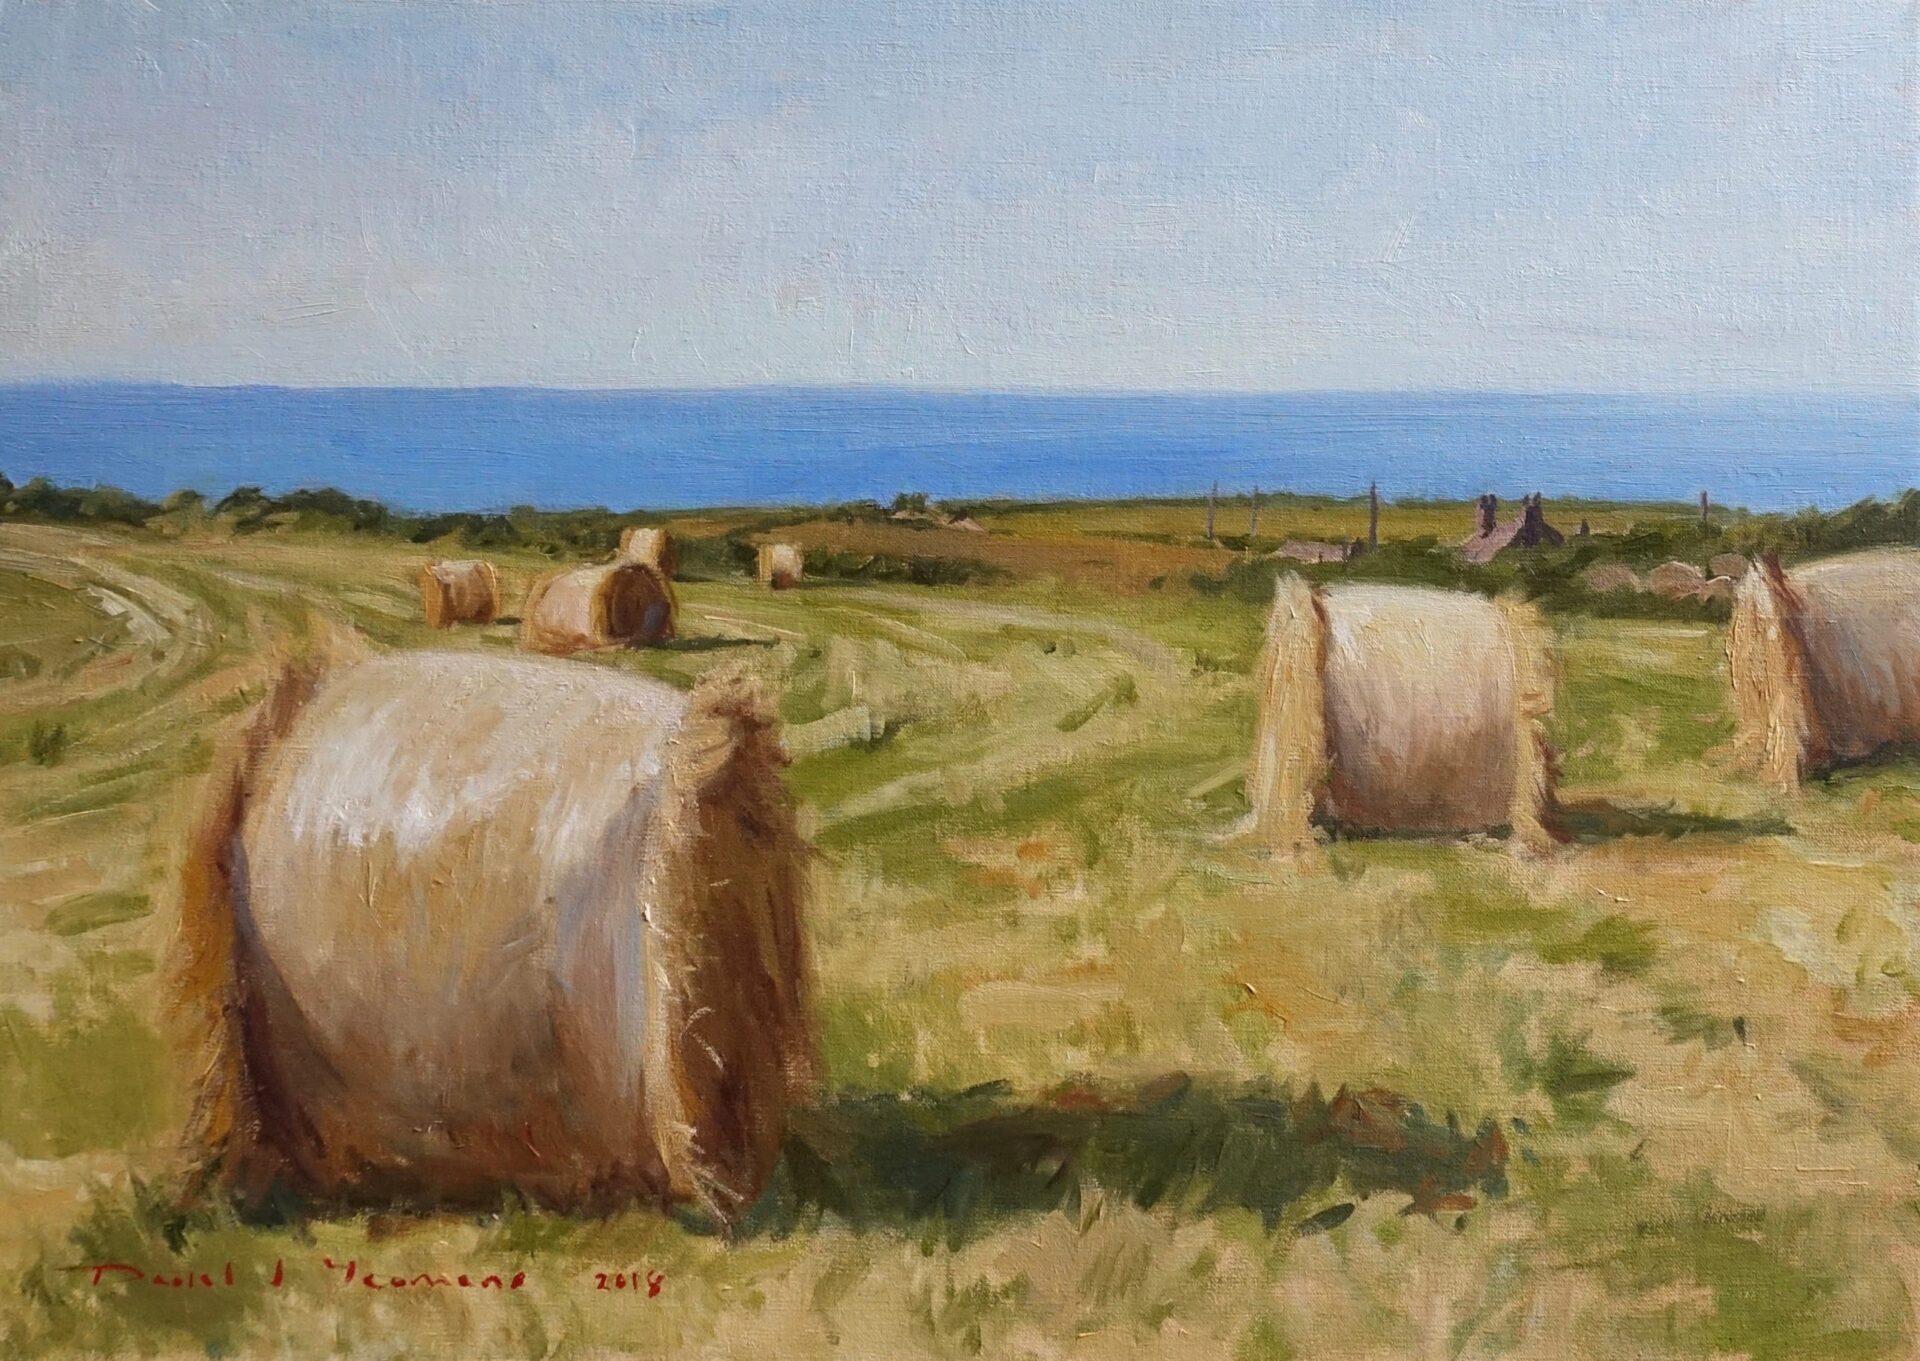 Oil piainting of Haybales on Anglesey overlooking the Irish Sea